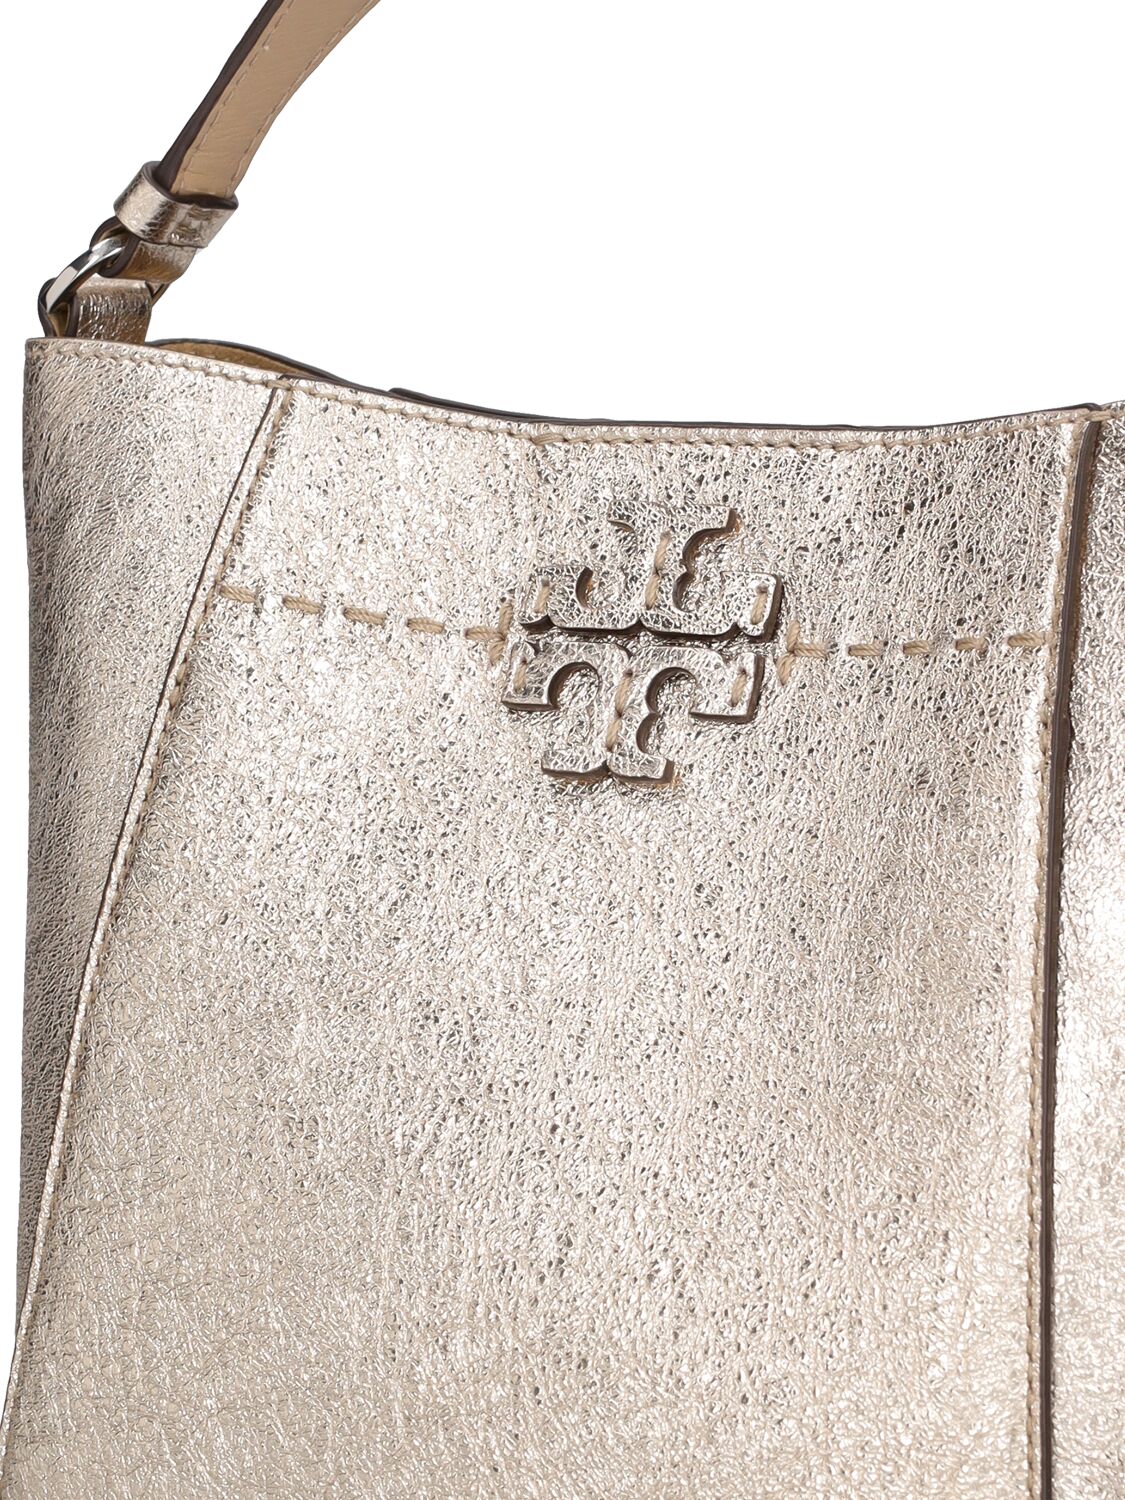 Shop Tory Burch Small Mcgraw Metallic Leather Bucket Bag In Gold